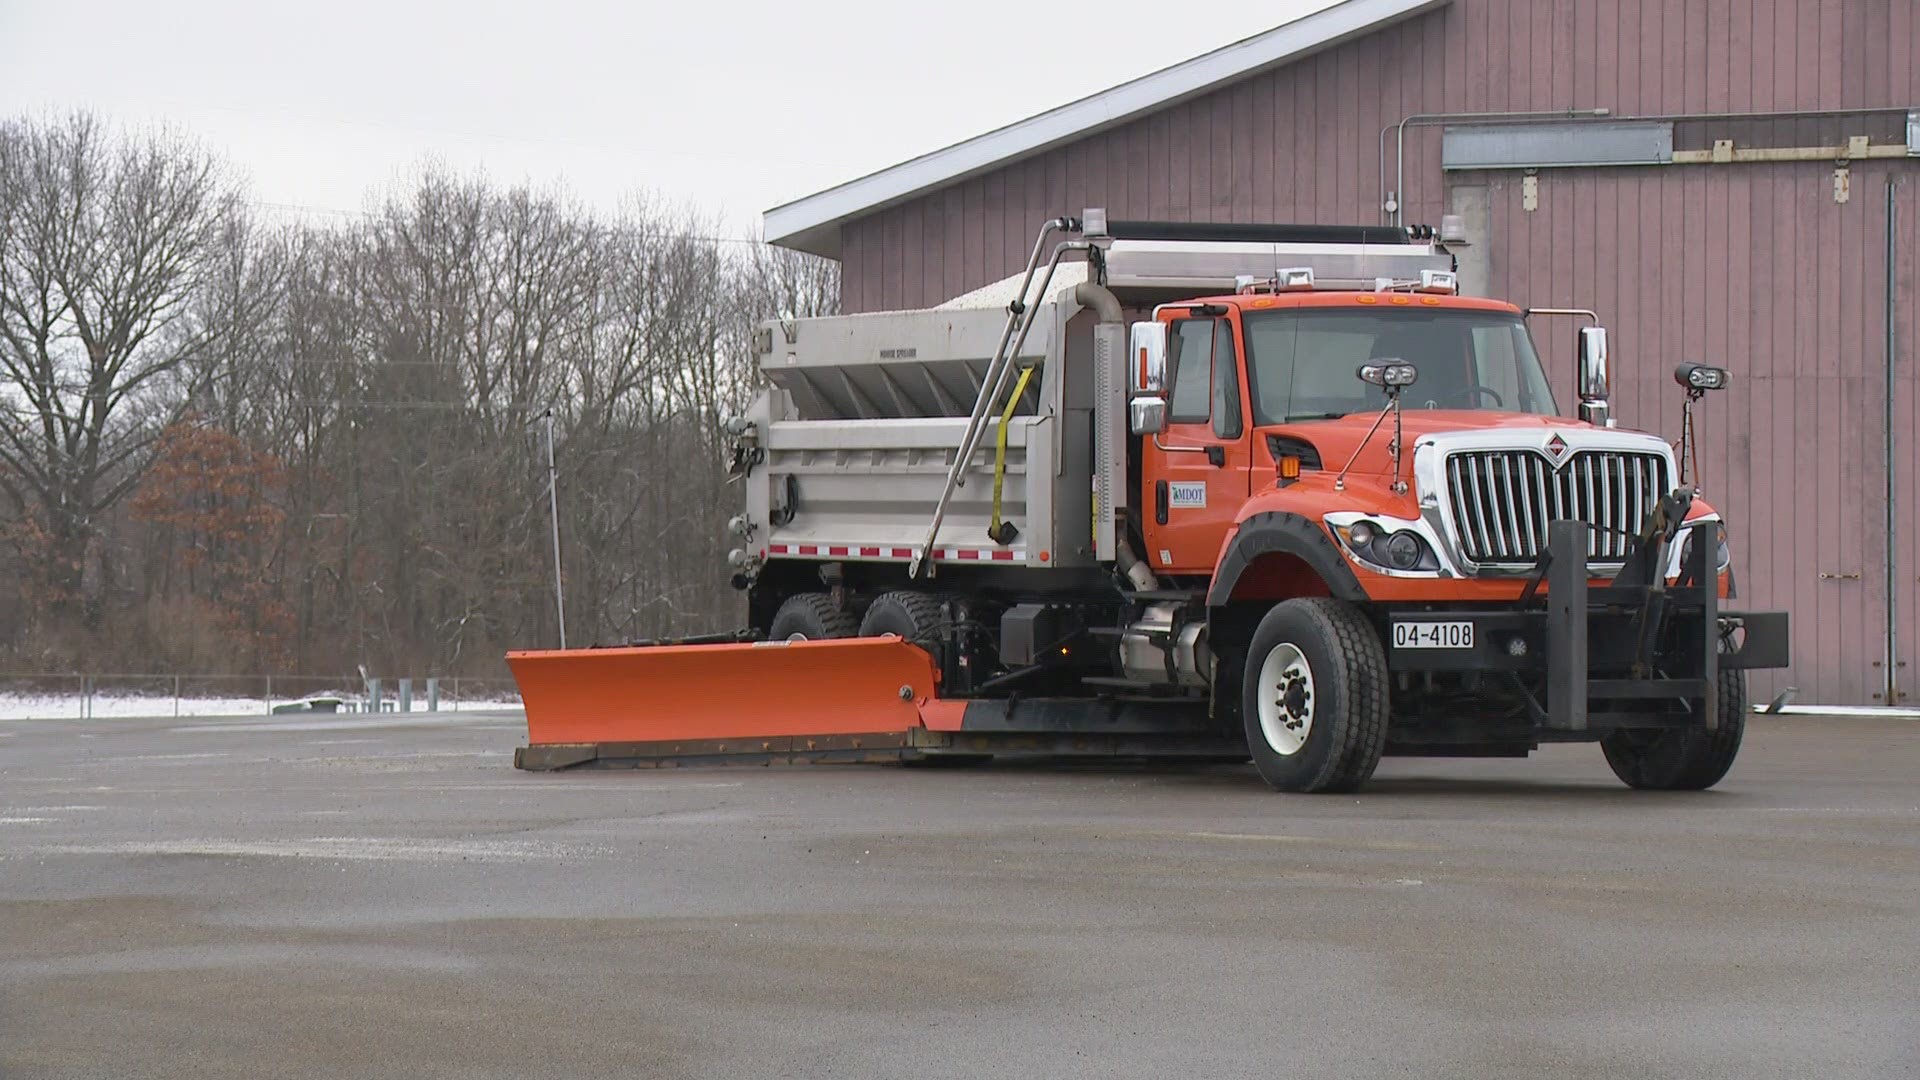 It started in Scotland late last year and immediately went viral. Now MDOT is doing it, and so far it's a raging success, pulling in over 6,000 snowplow names.